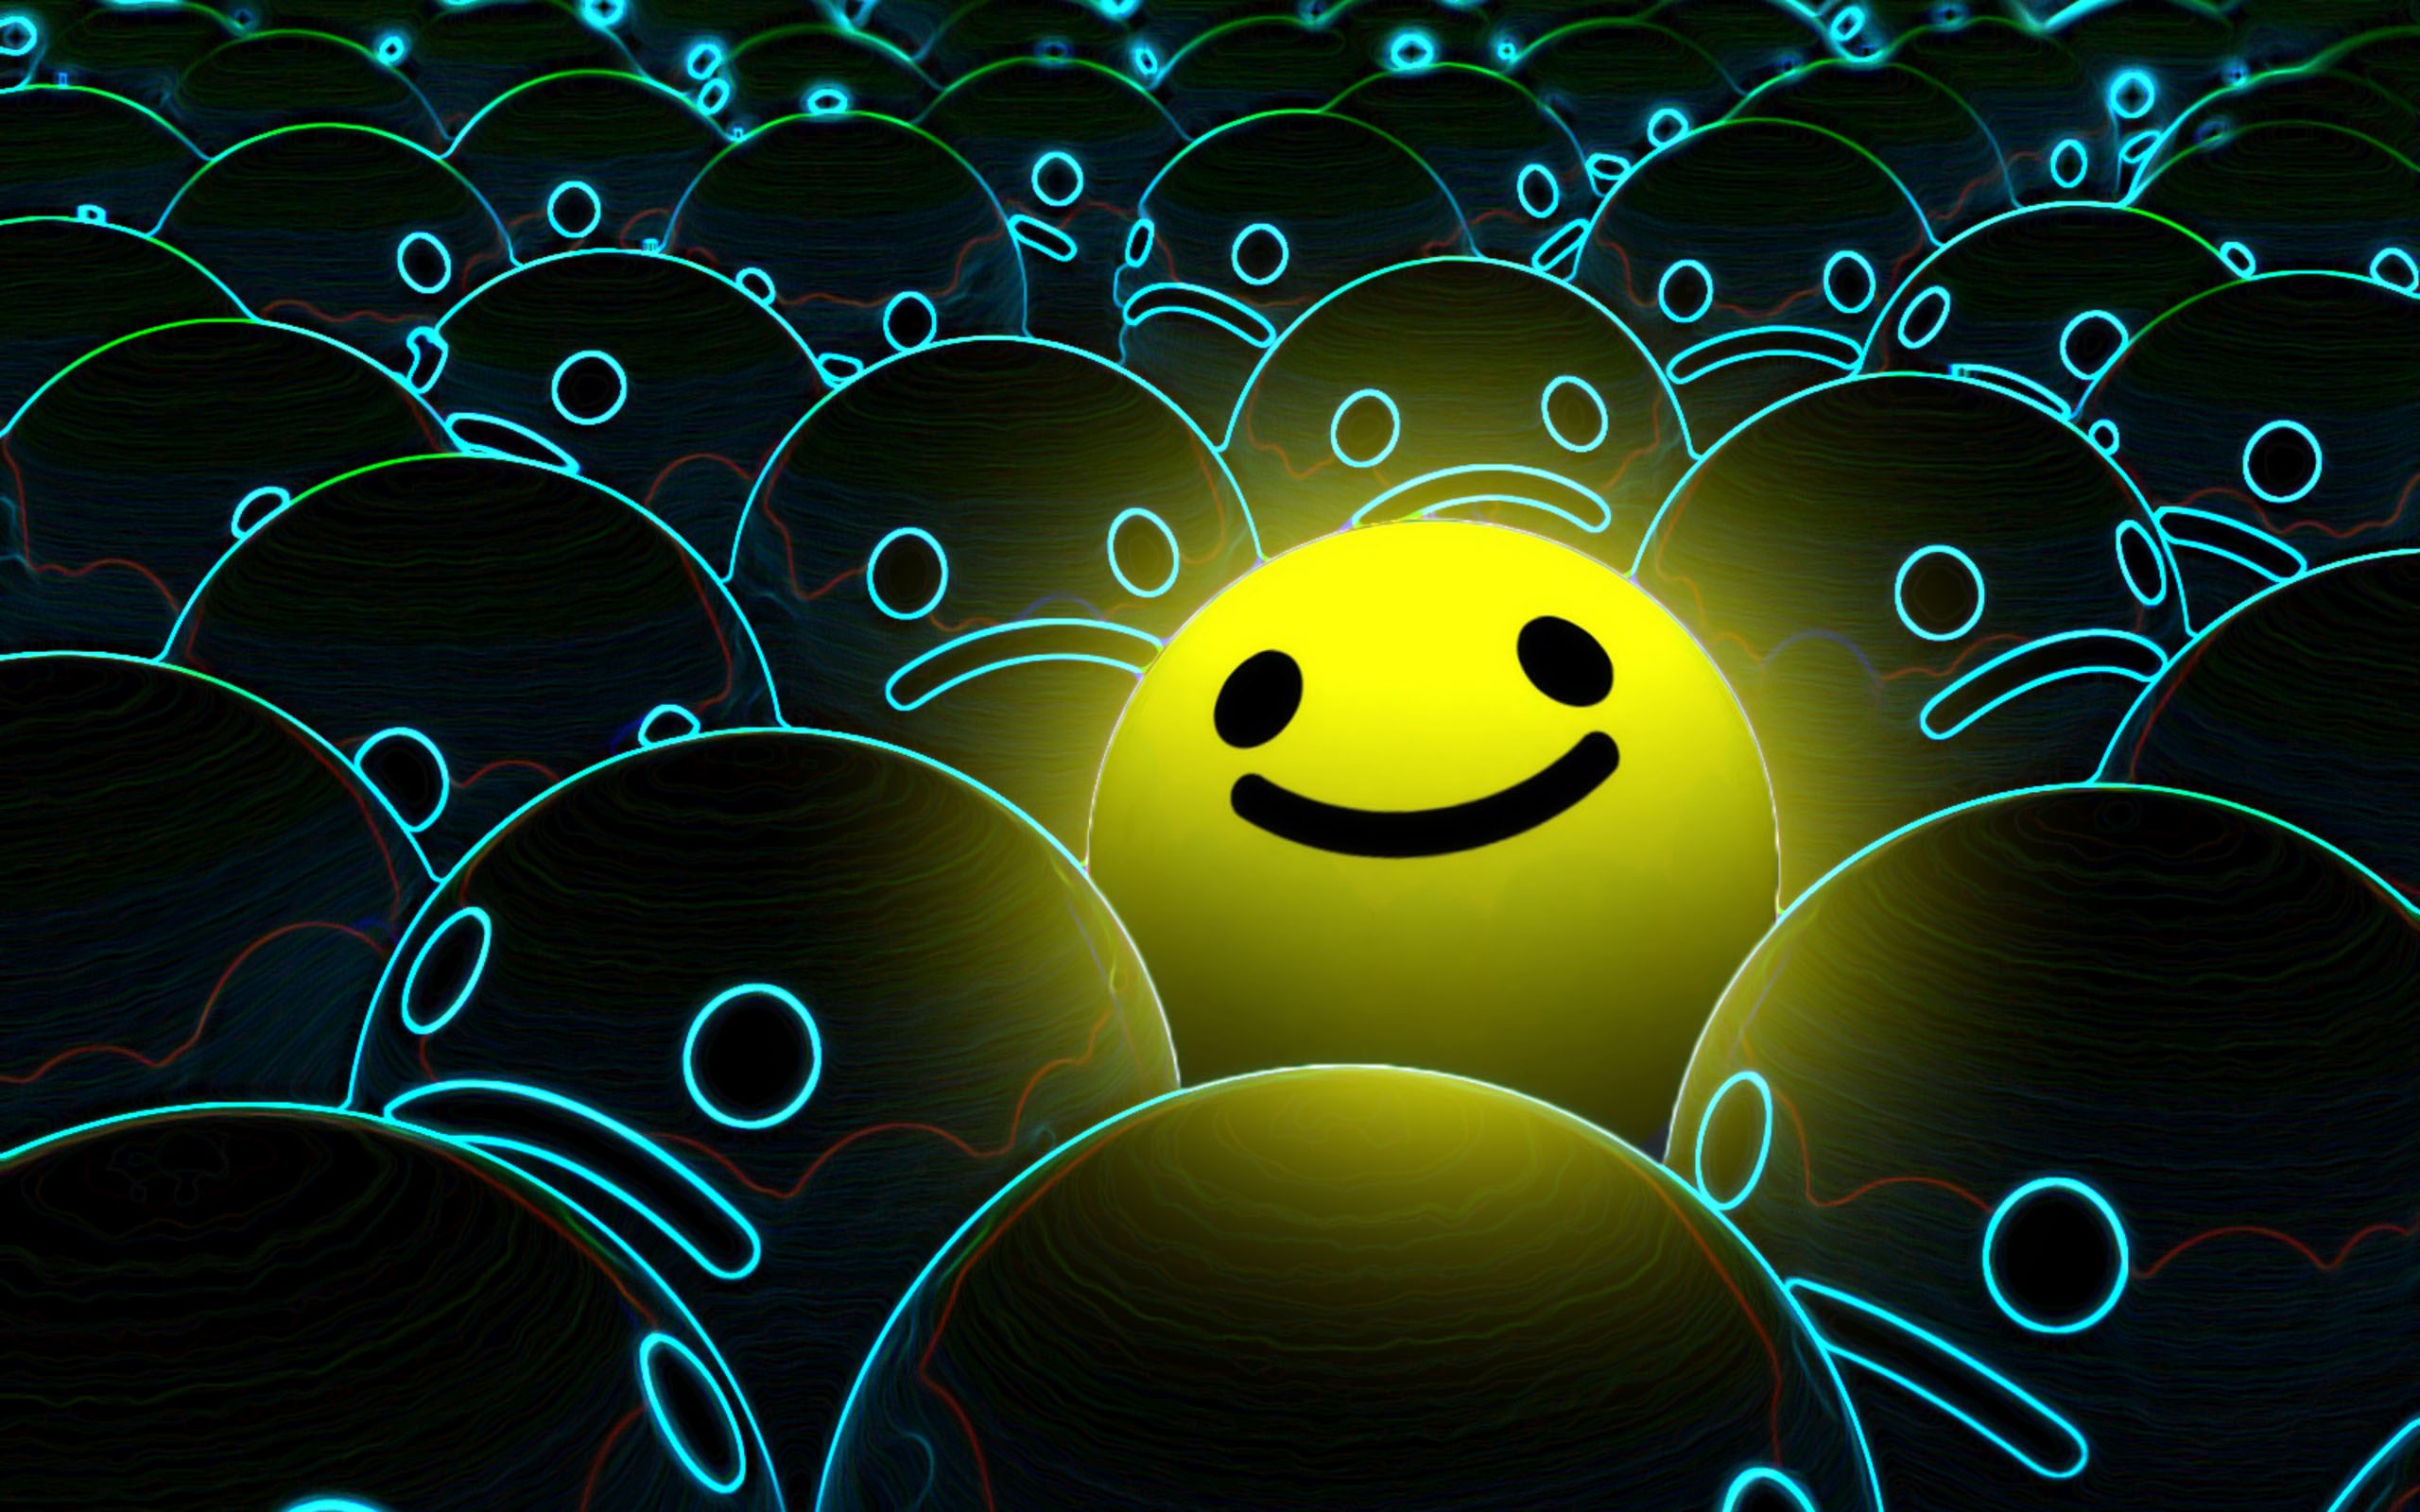 Smiley Face Among Sad Faces Wallpaper HD In High Resolution At